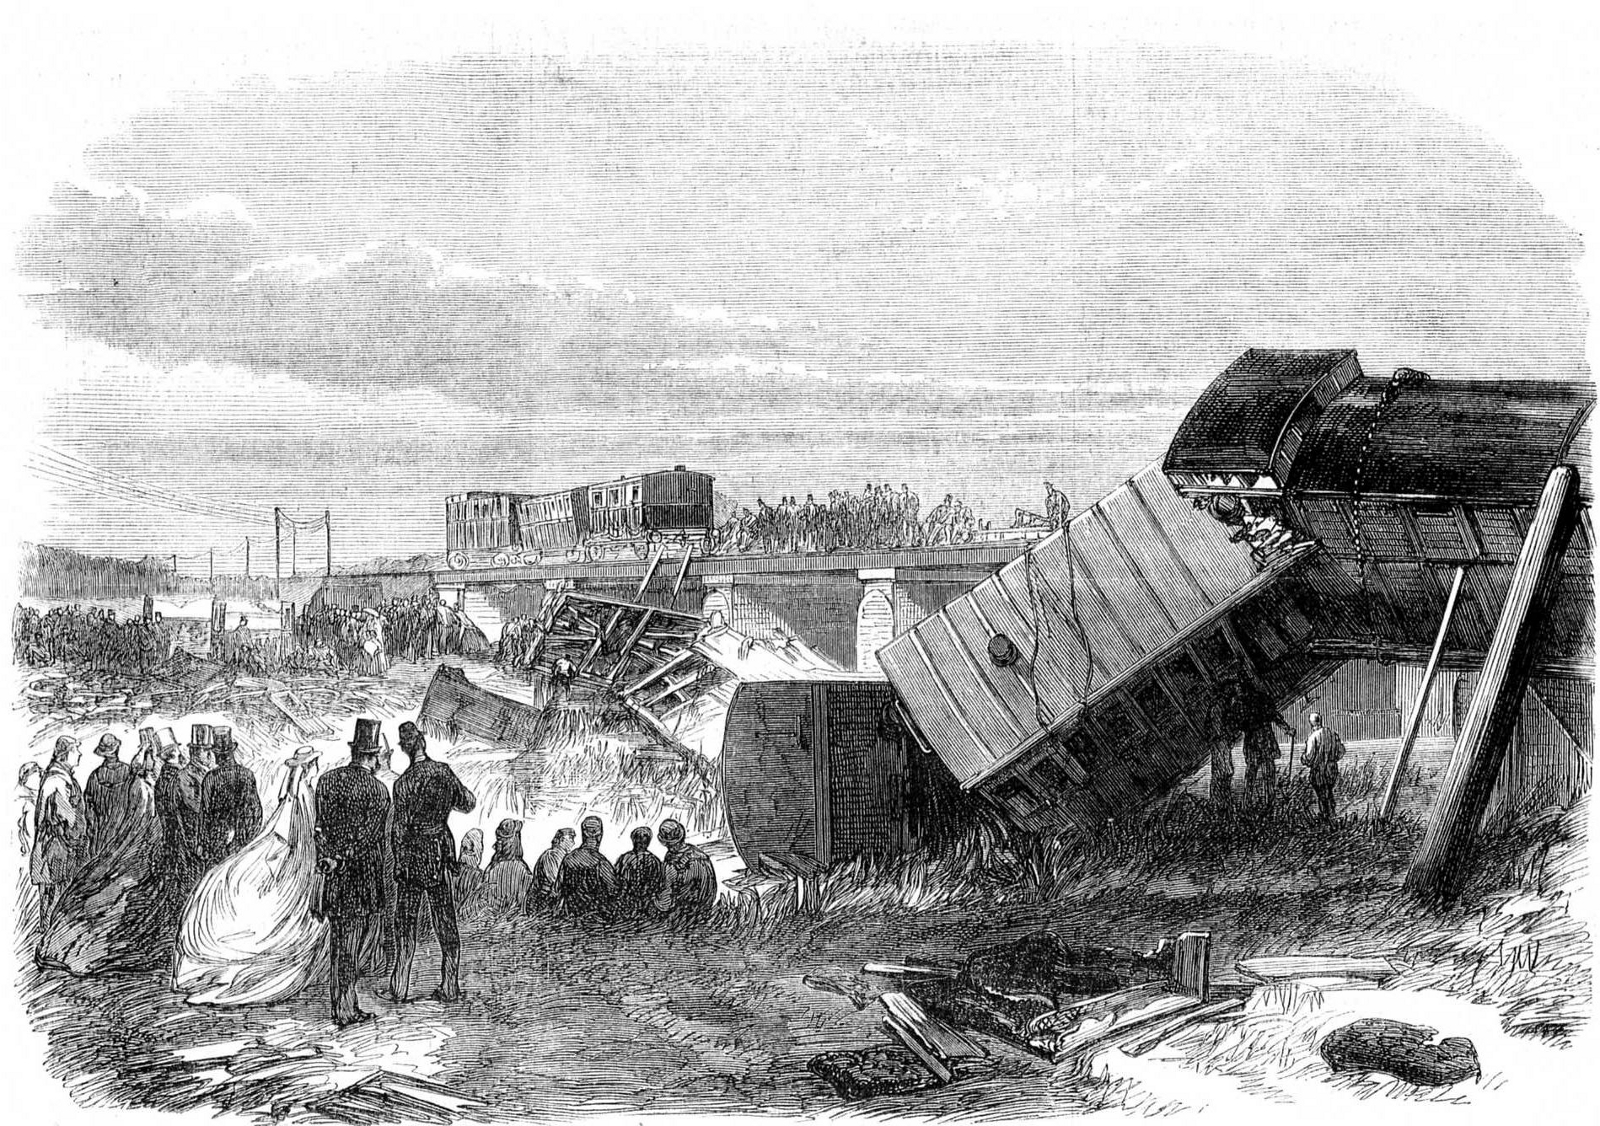 A newspaper engraving depicting the tragedy near Staplehurst. Dickens' coach can be seen on the right.